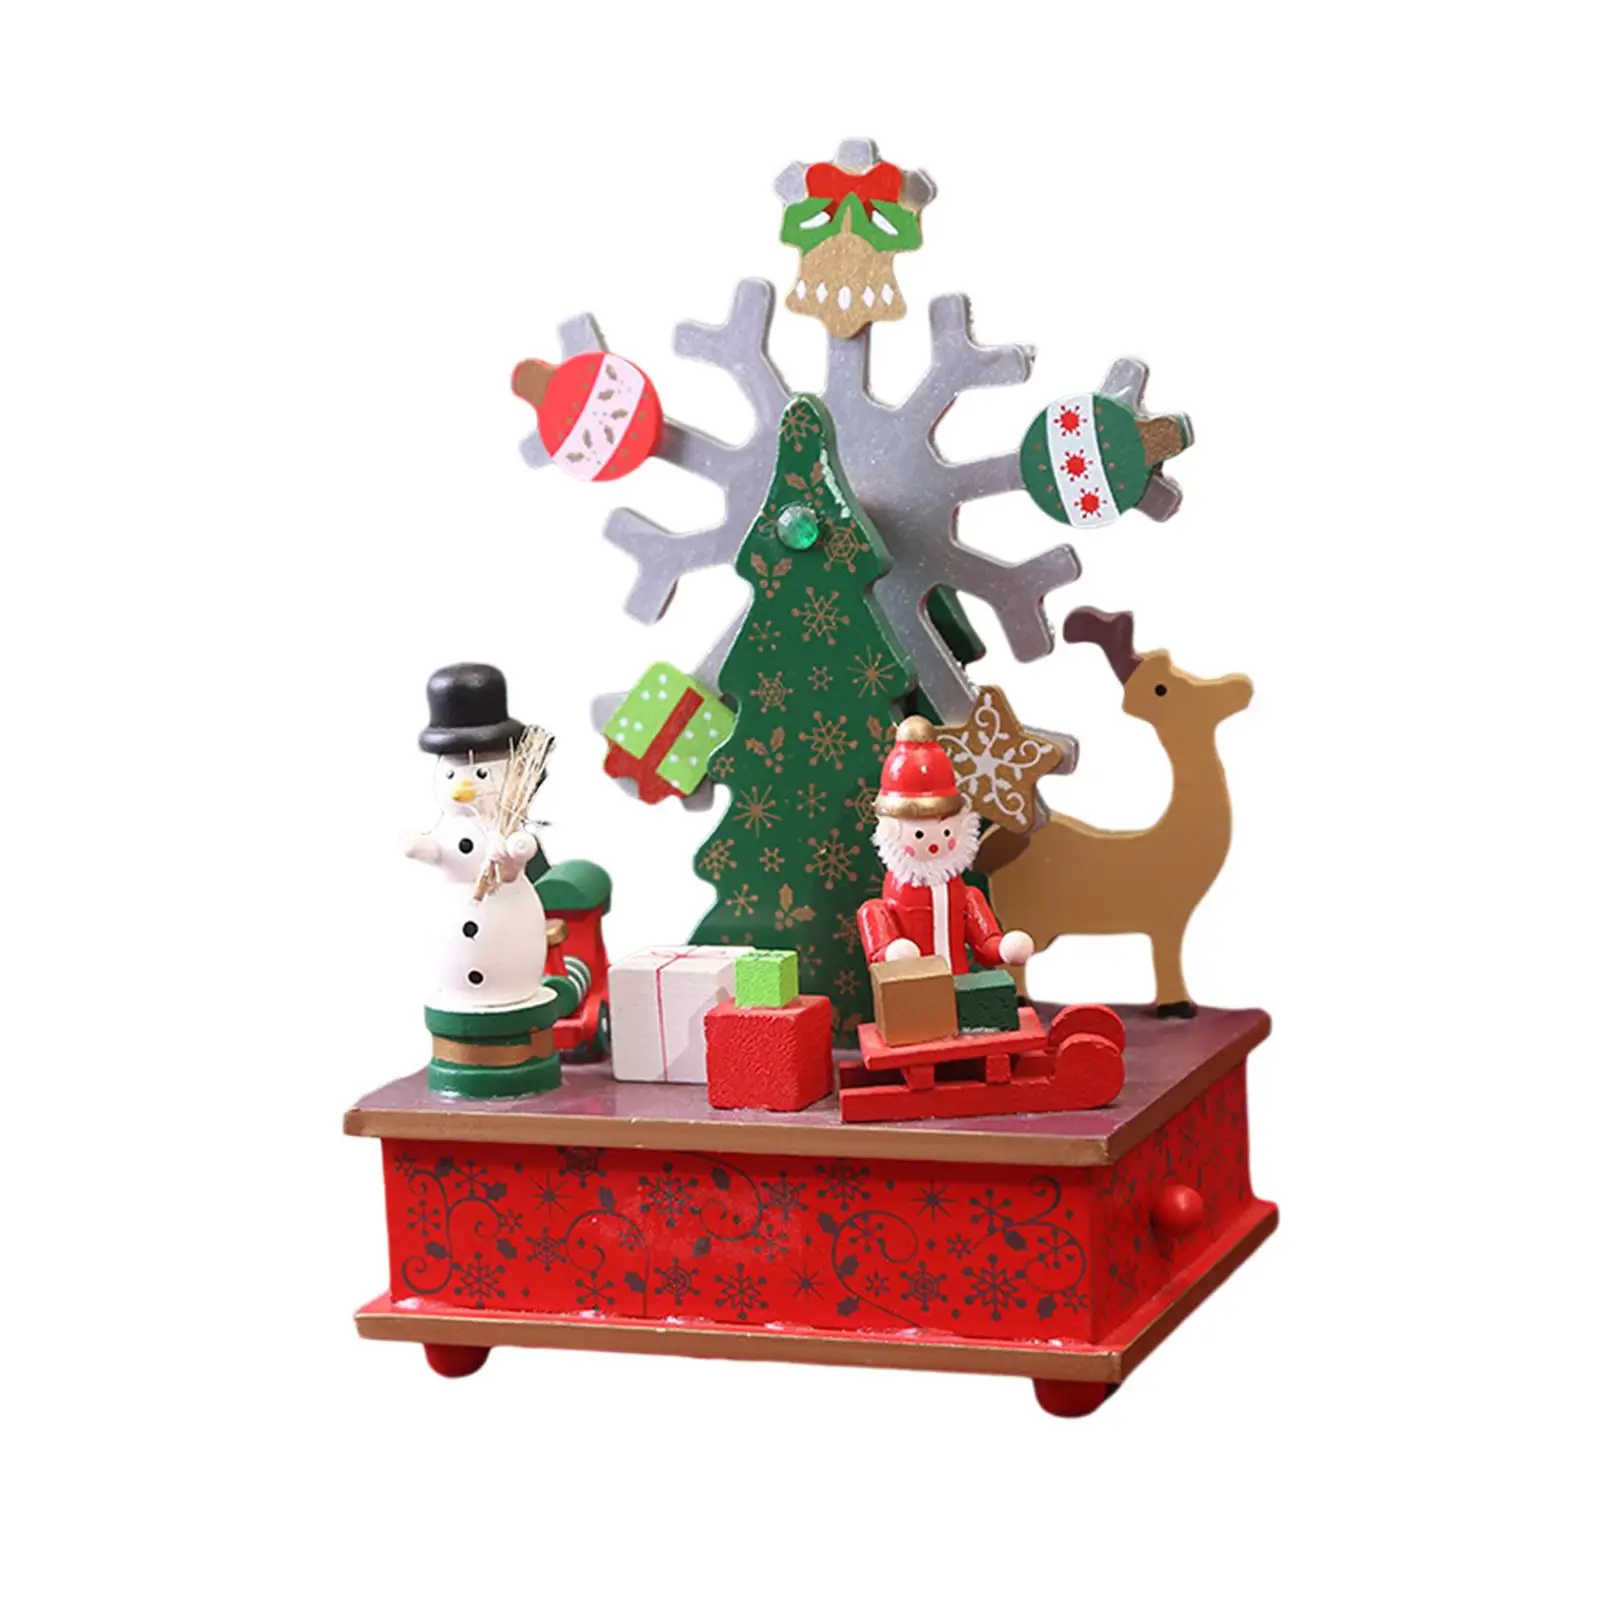 Musical Box Decoration Accessories Rotatable Wood Collectible Christmas Ornament Table Centerpiece for Fireplace Bedroom